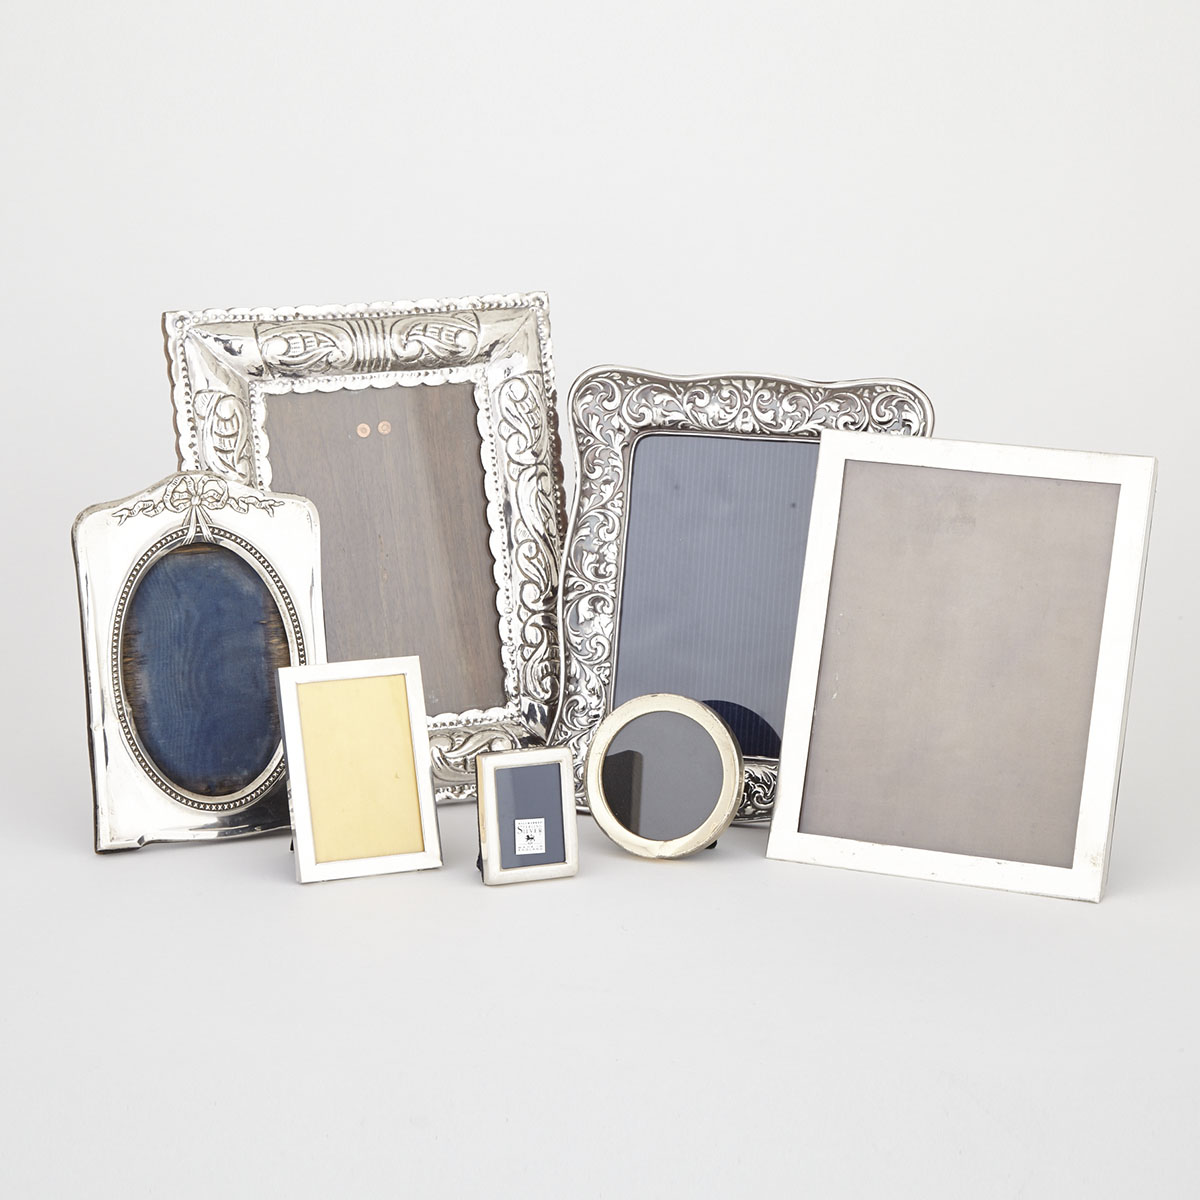 Group of Seven Various Silver Photograph Frames, 20th century